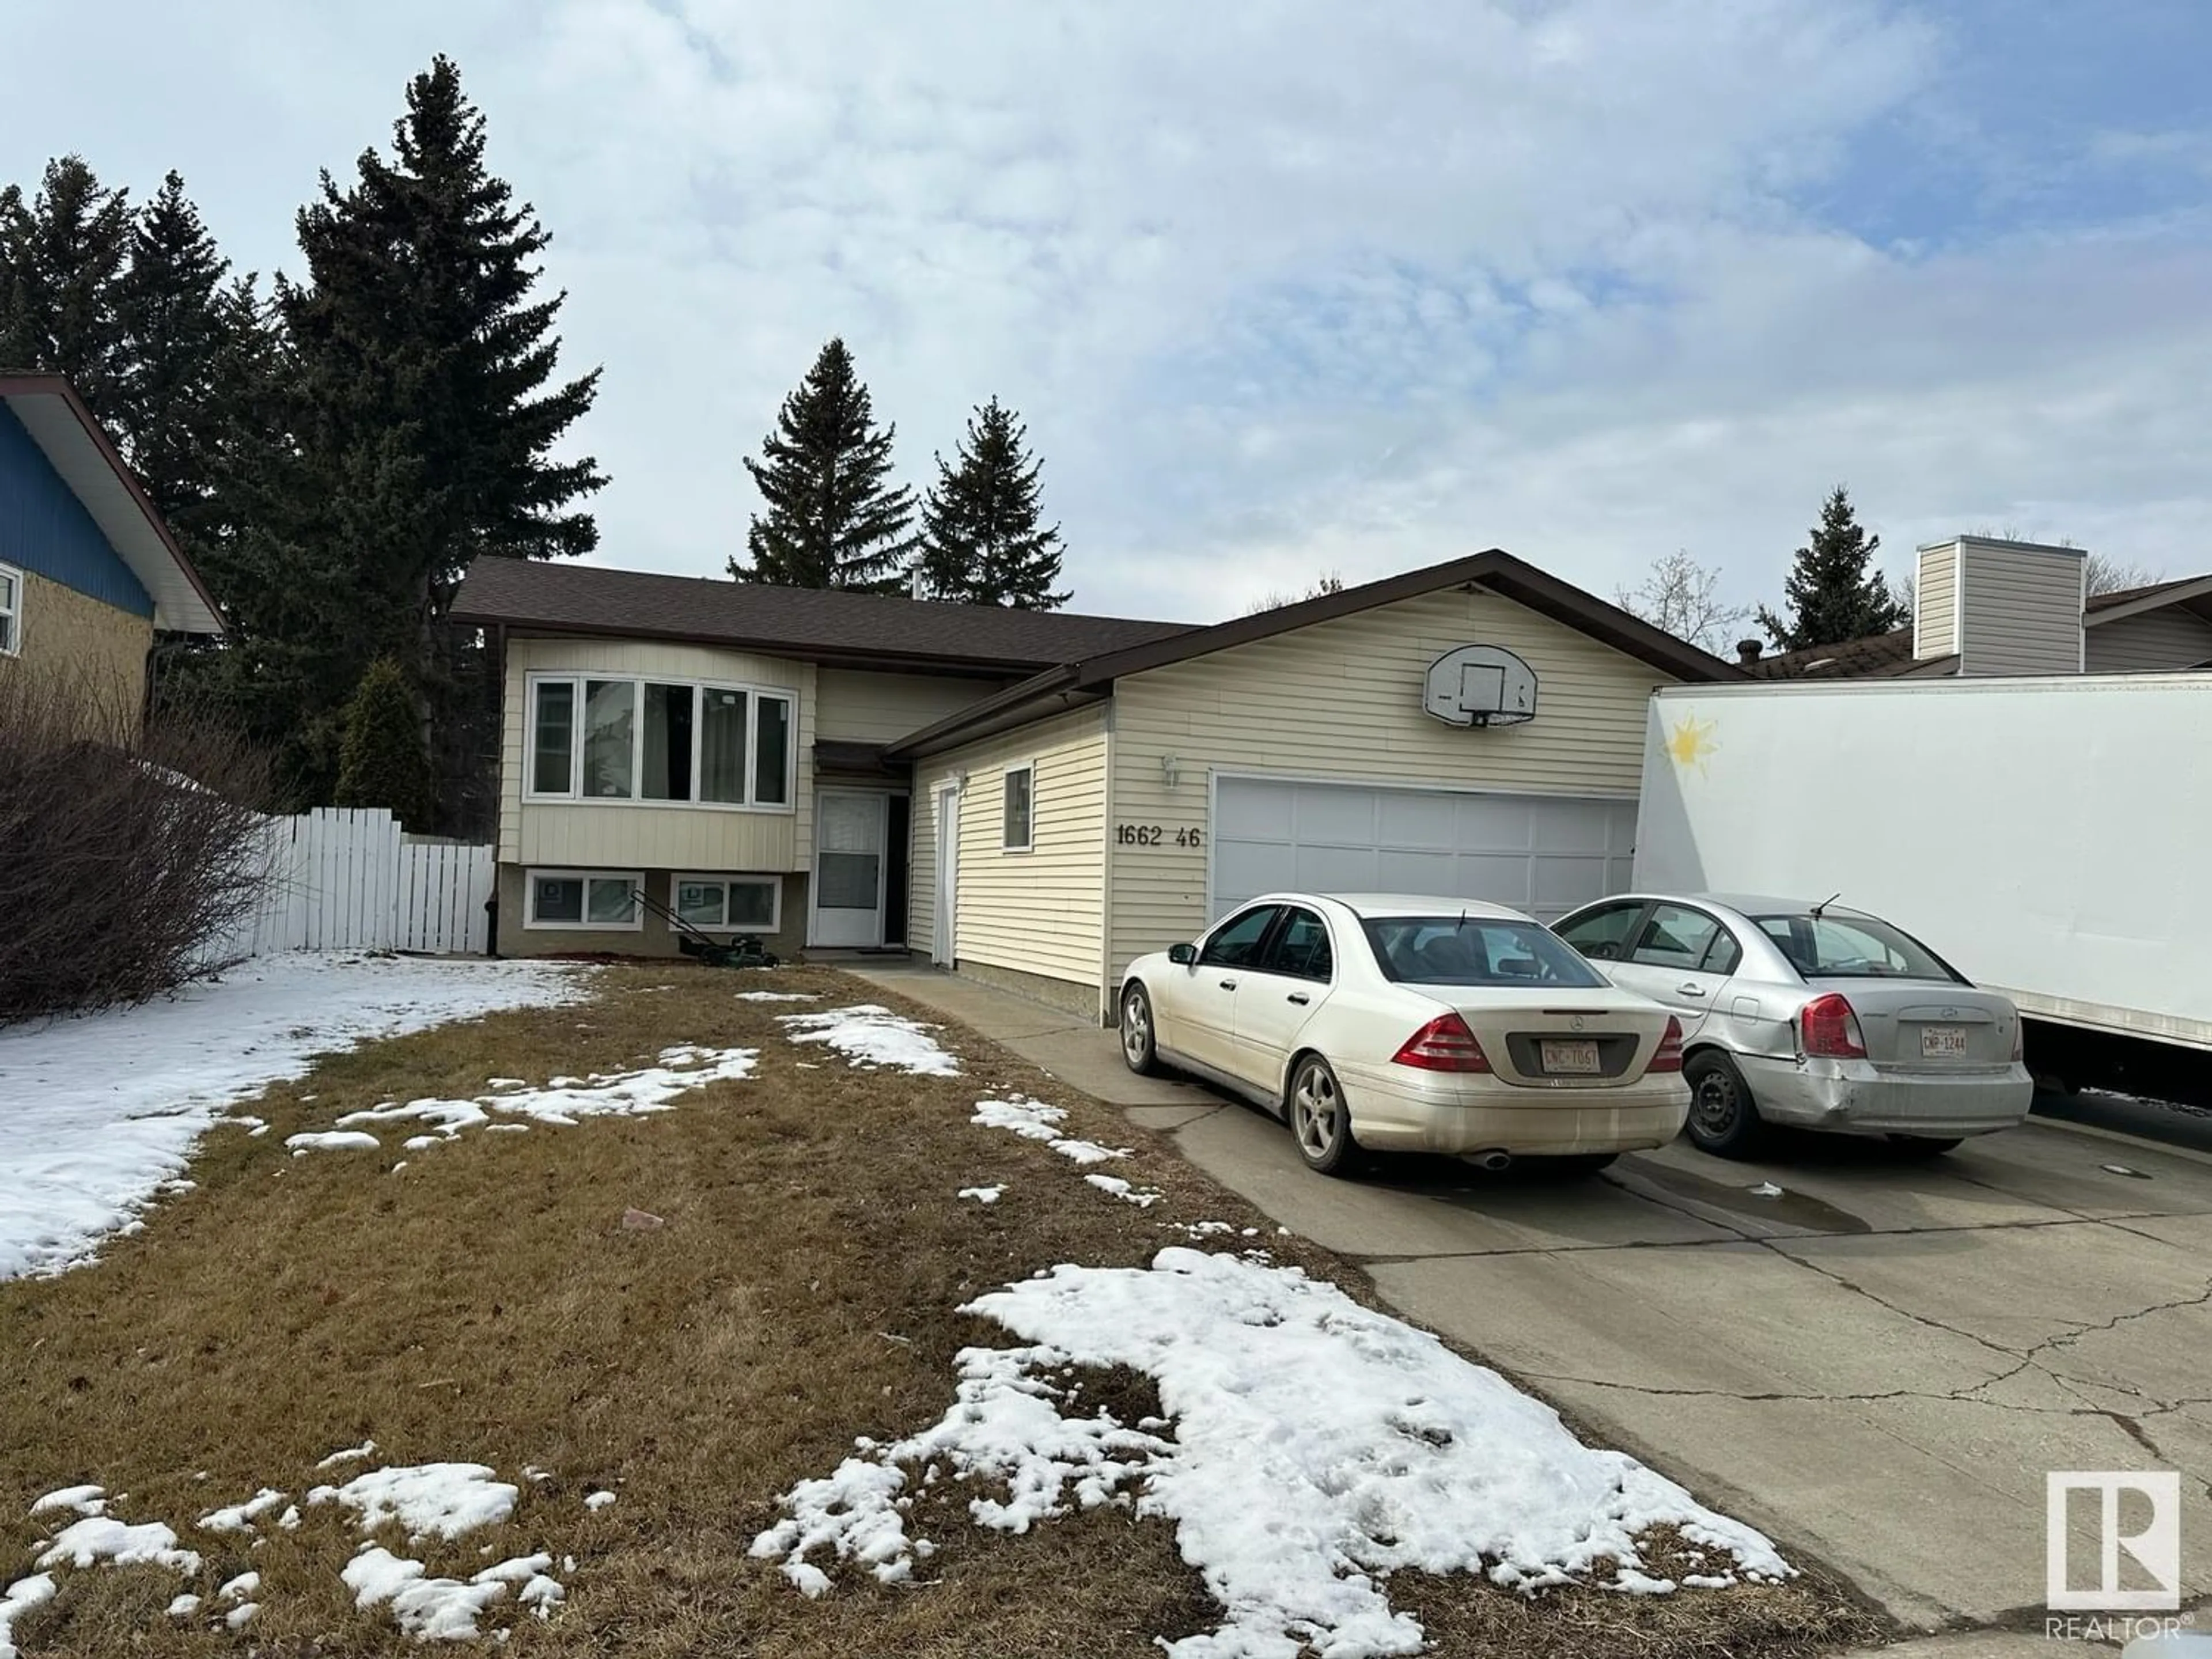 Frontside or backside of a home for 1662 46 ST NW, Edmonton Alberta T6L3H7